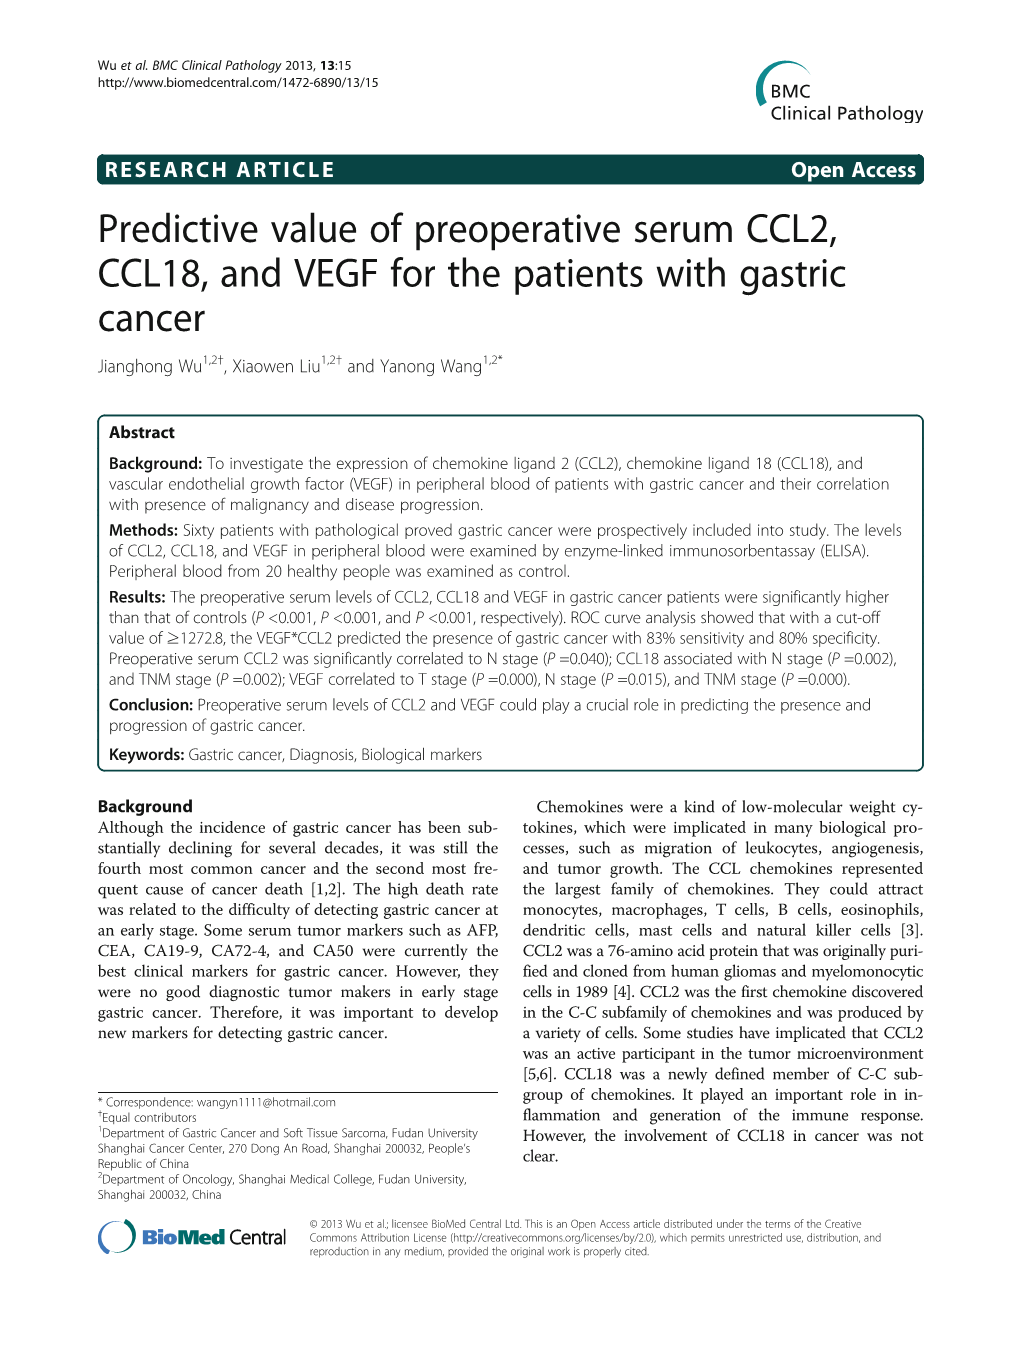 Predictive Value of Preoperative Serum CCL2, CCL18, and VEGF for the Patients with Gastric Cancer Jianghong Wu1,2†, Xiaowen Liu1,2† and Yanong Wang1,2*